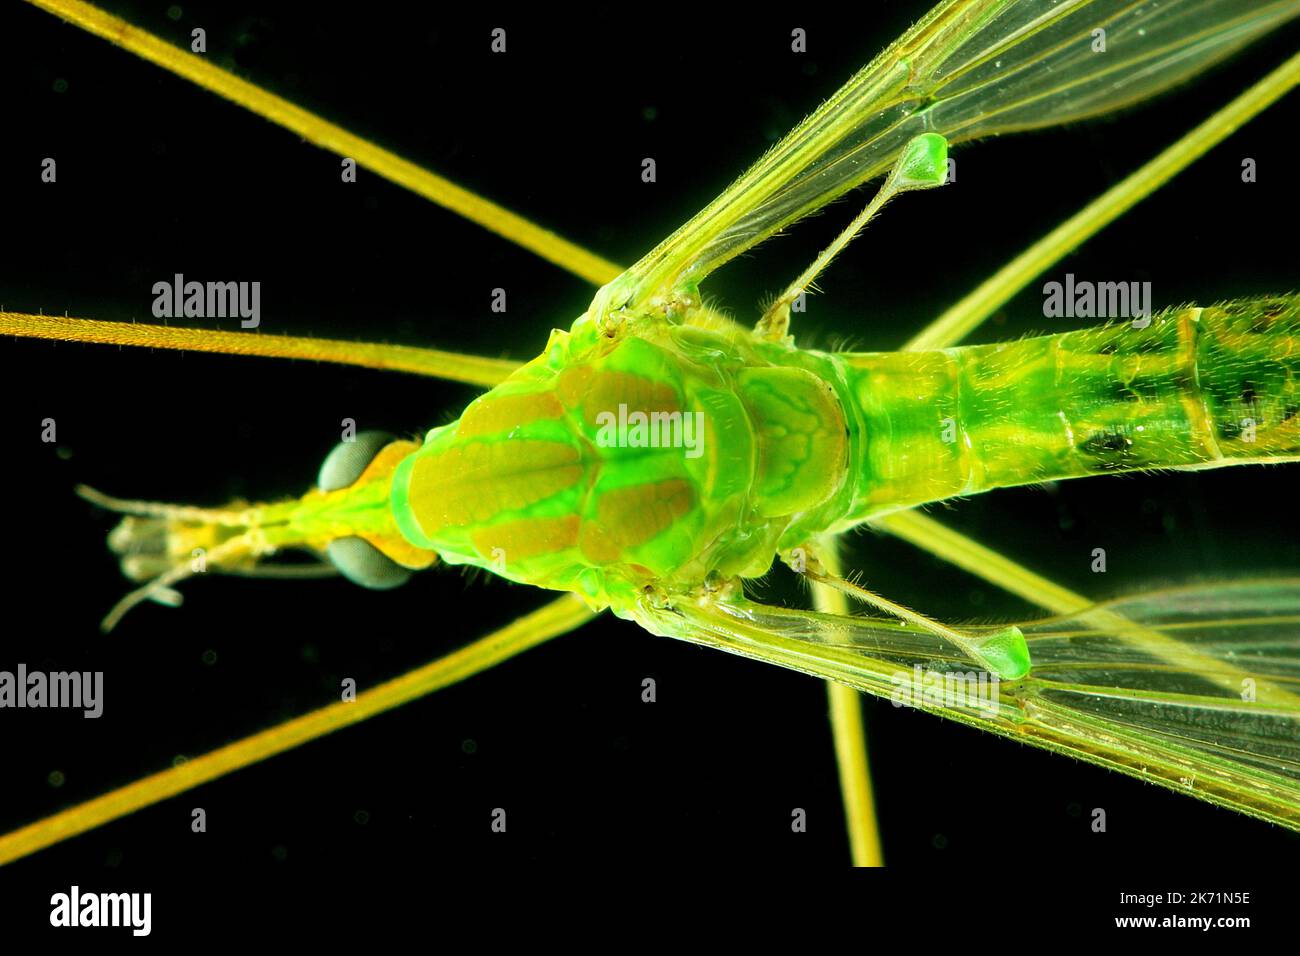 Cranefly (Diptera) halteres used for balance during flight Stock Photo